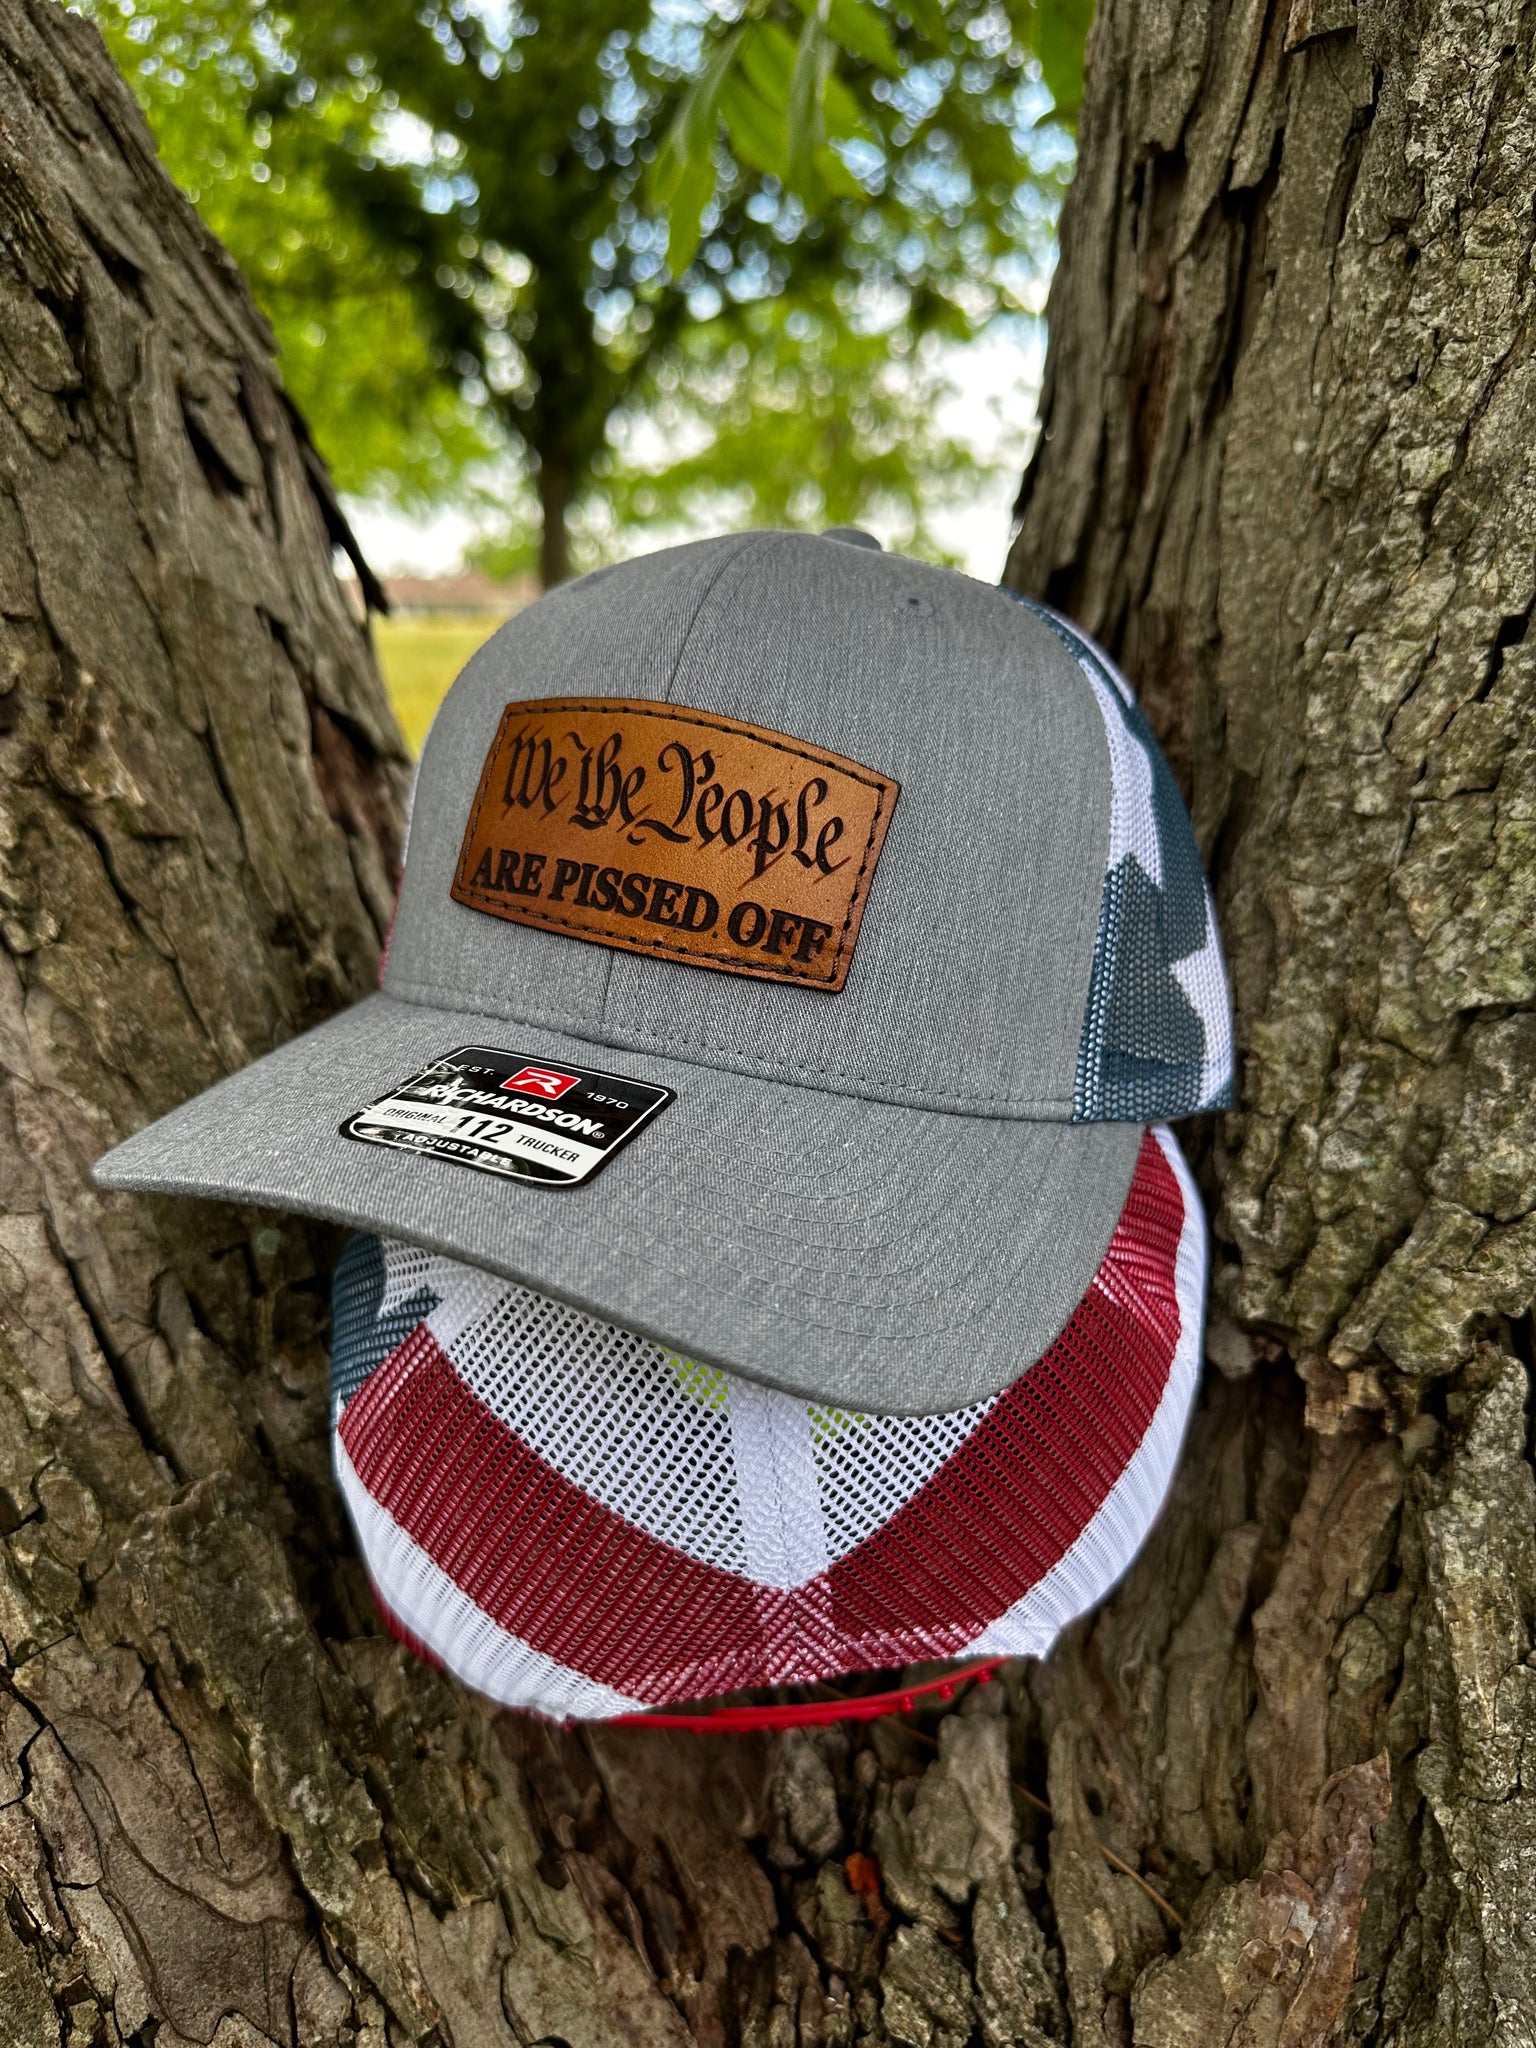 Fuck Around and find Out Patch Hat – Southern Charm Boutique FL